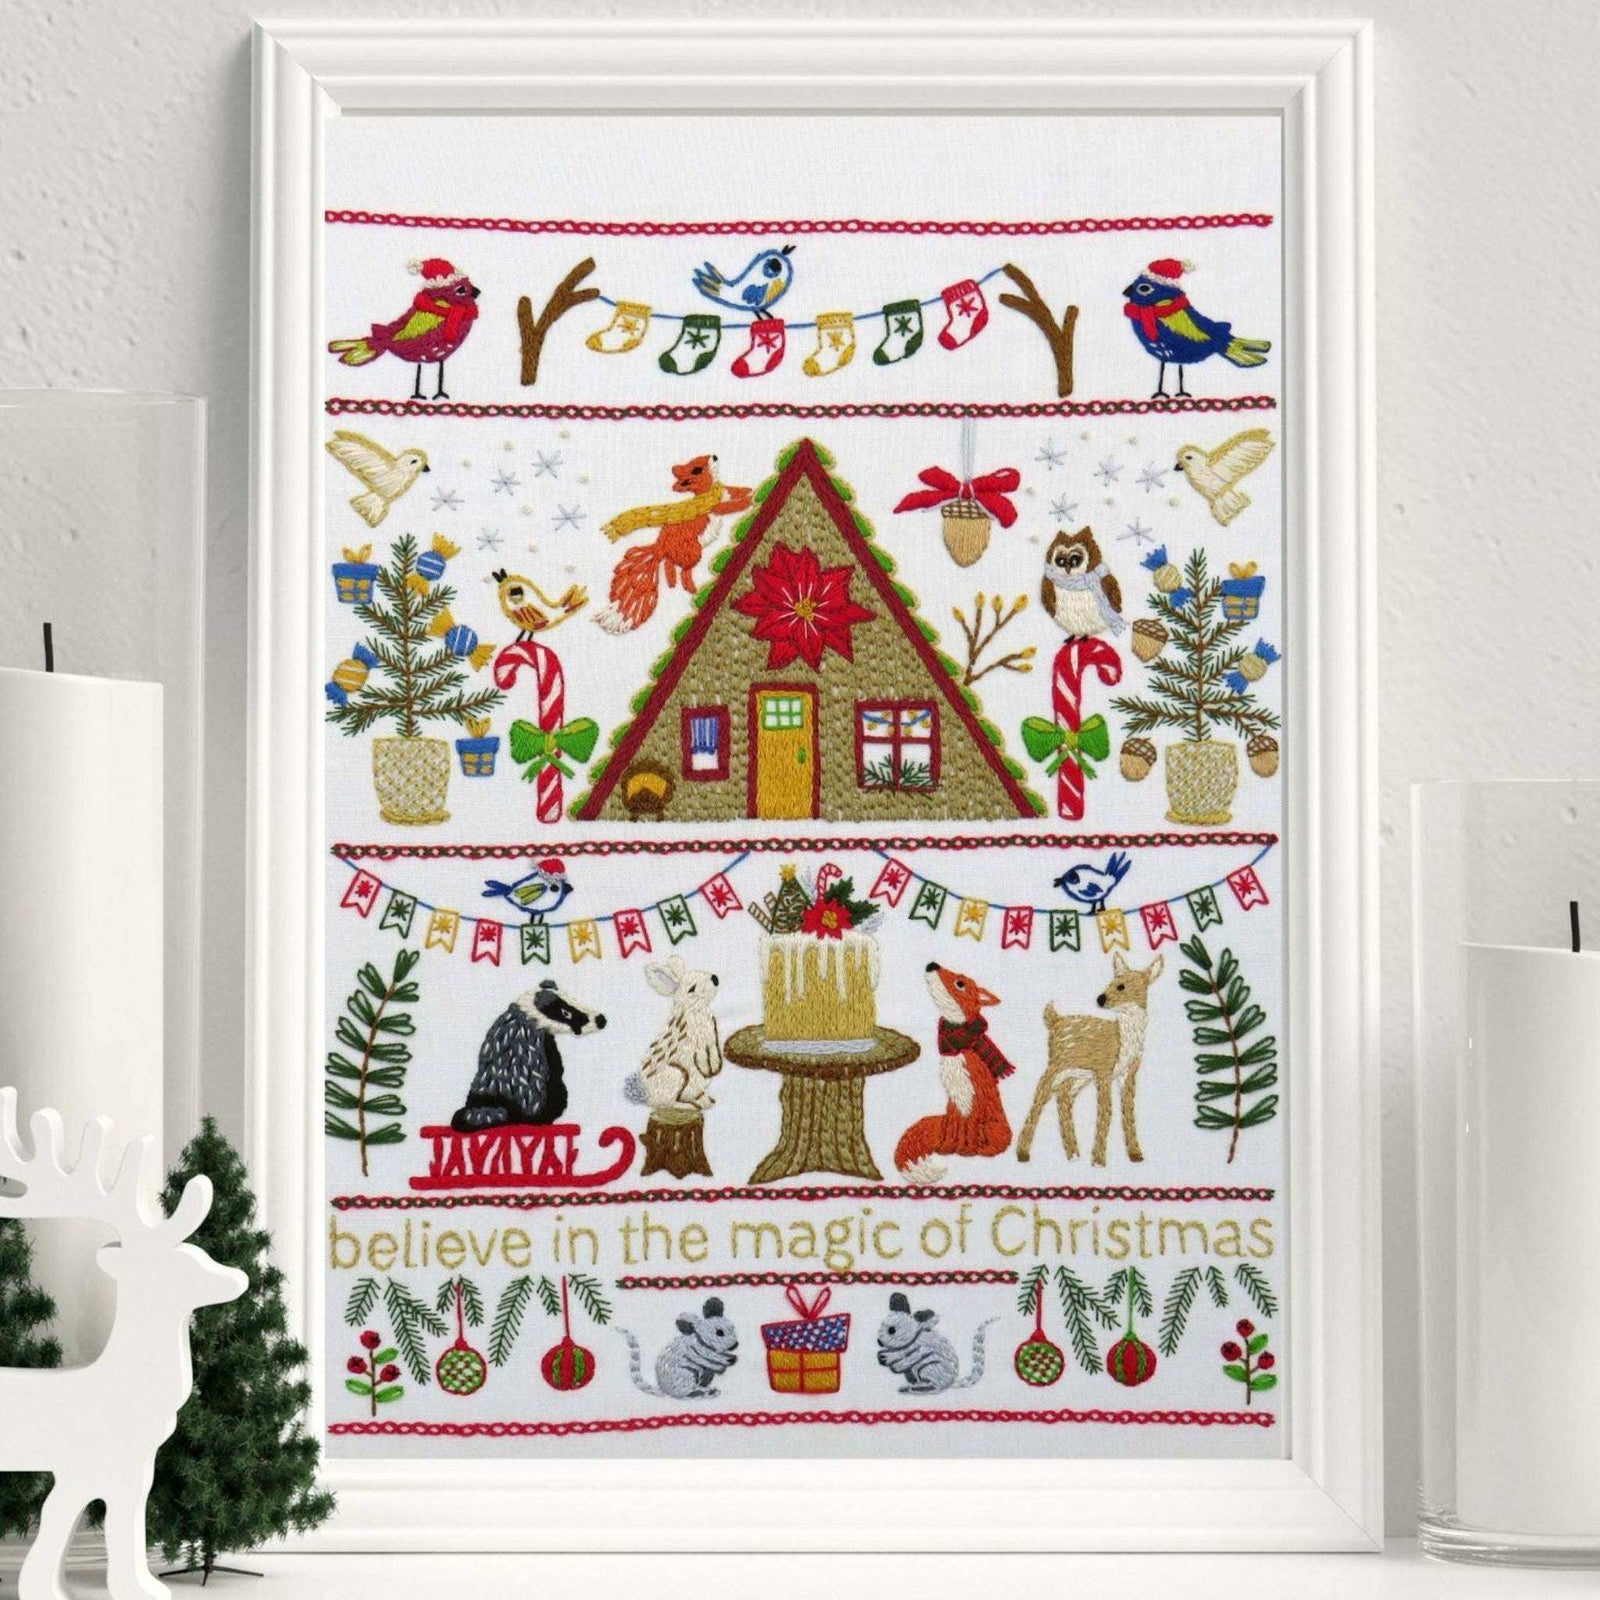 Festive Forest Hand Embroidery Pattern , PDF Download , StitchDoodles , Christmas Embroidery, embroidery hoop kit, embroidery kits for adults, embroidery kits for beginners, flower embroidery, forest embroidery, hand embroidery, modern embroidery kits, PDF pattern, unique embroidery kits , StitchDoodles , shop.stitchdoodles.com